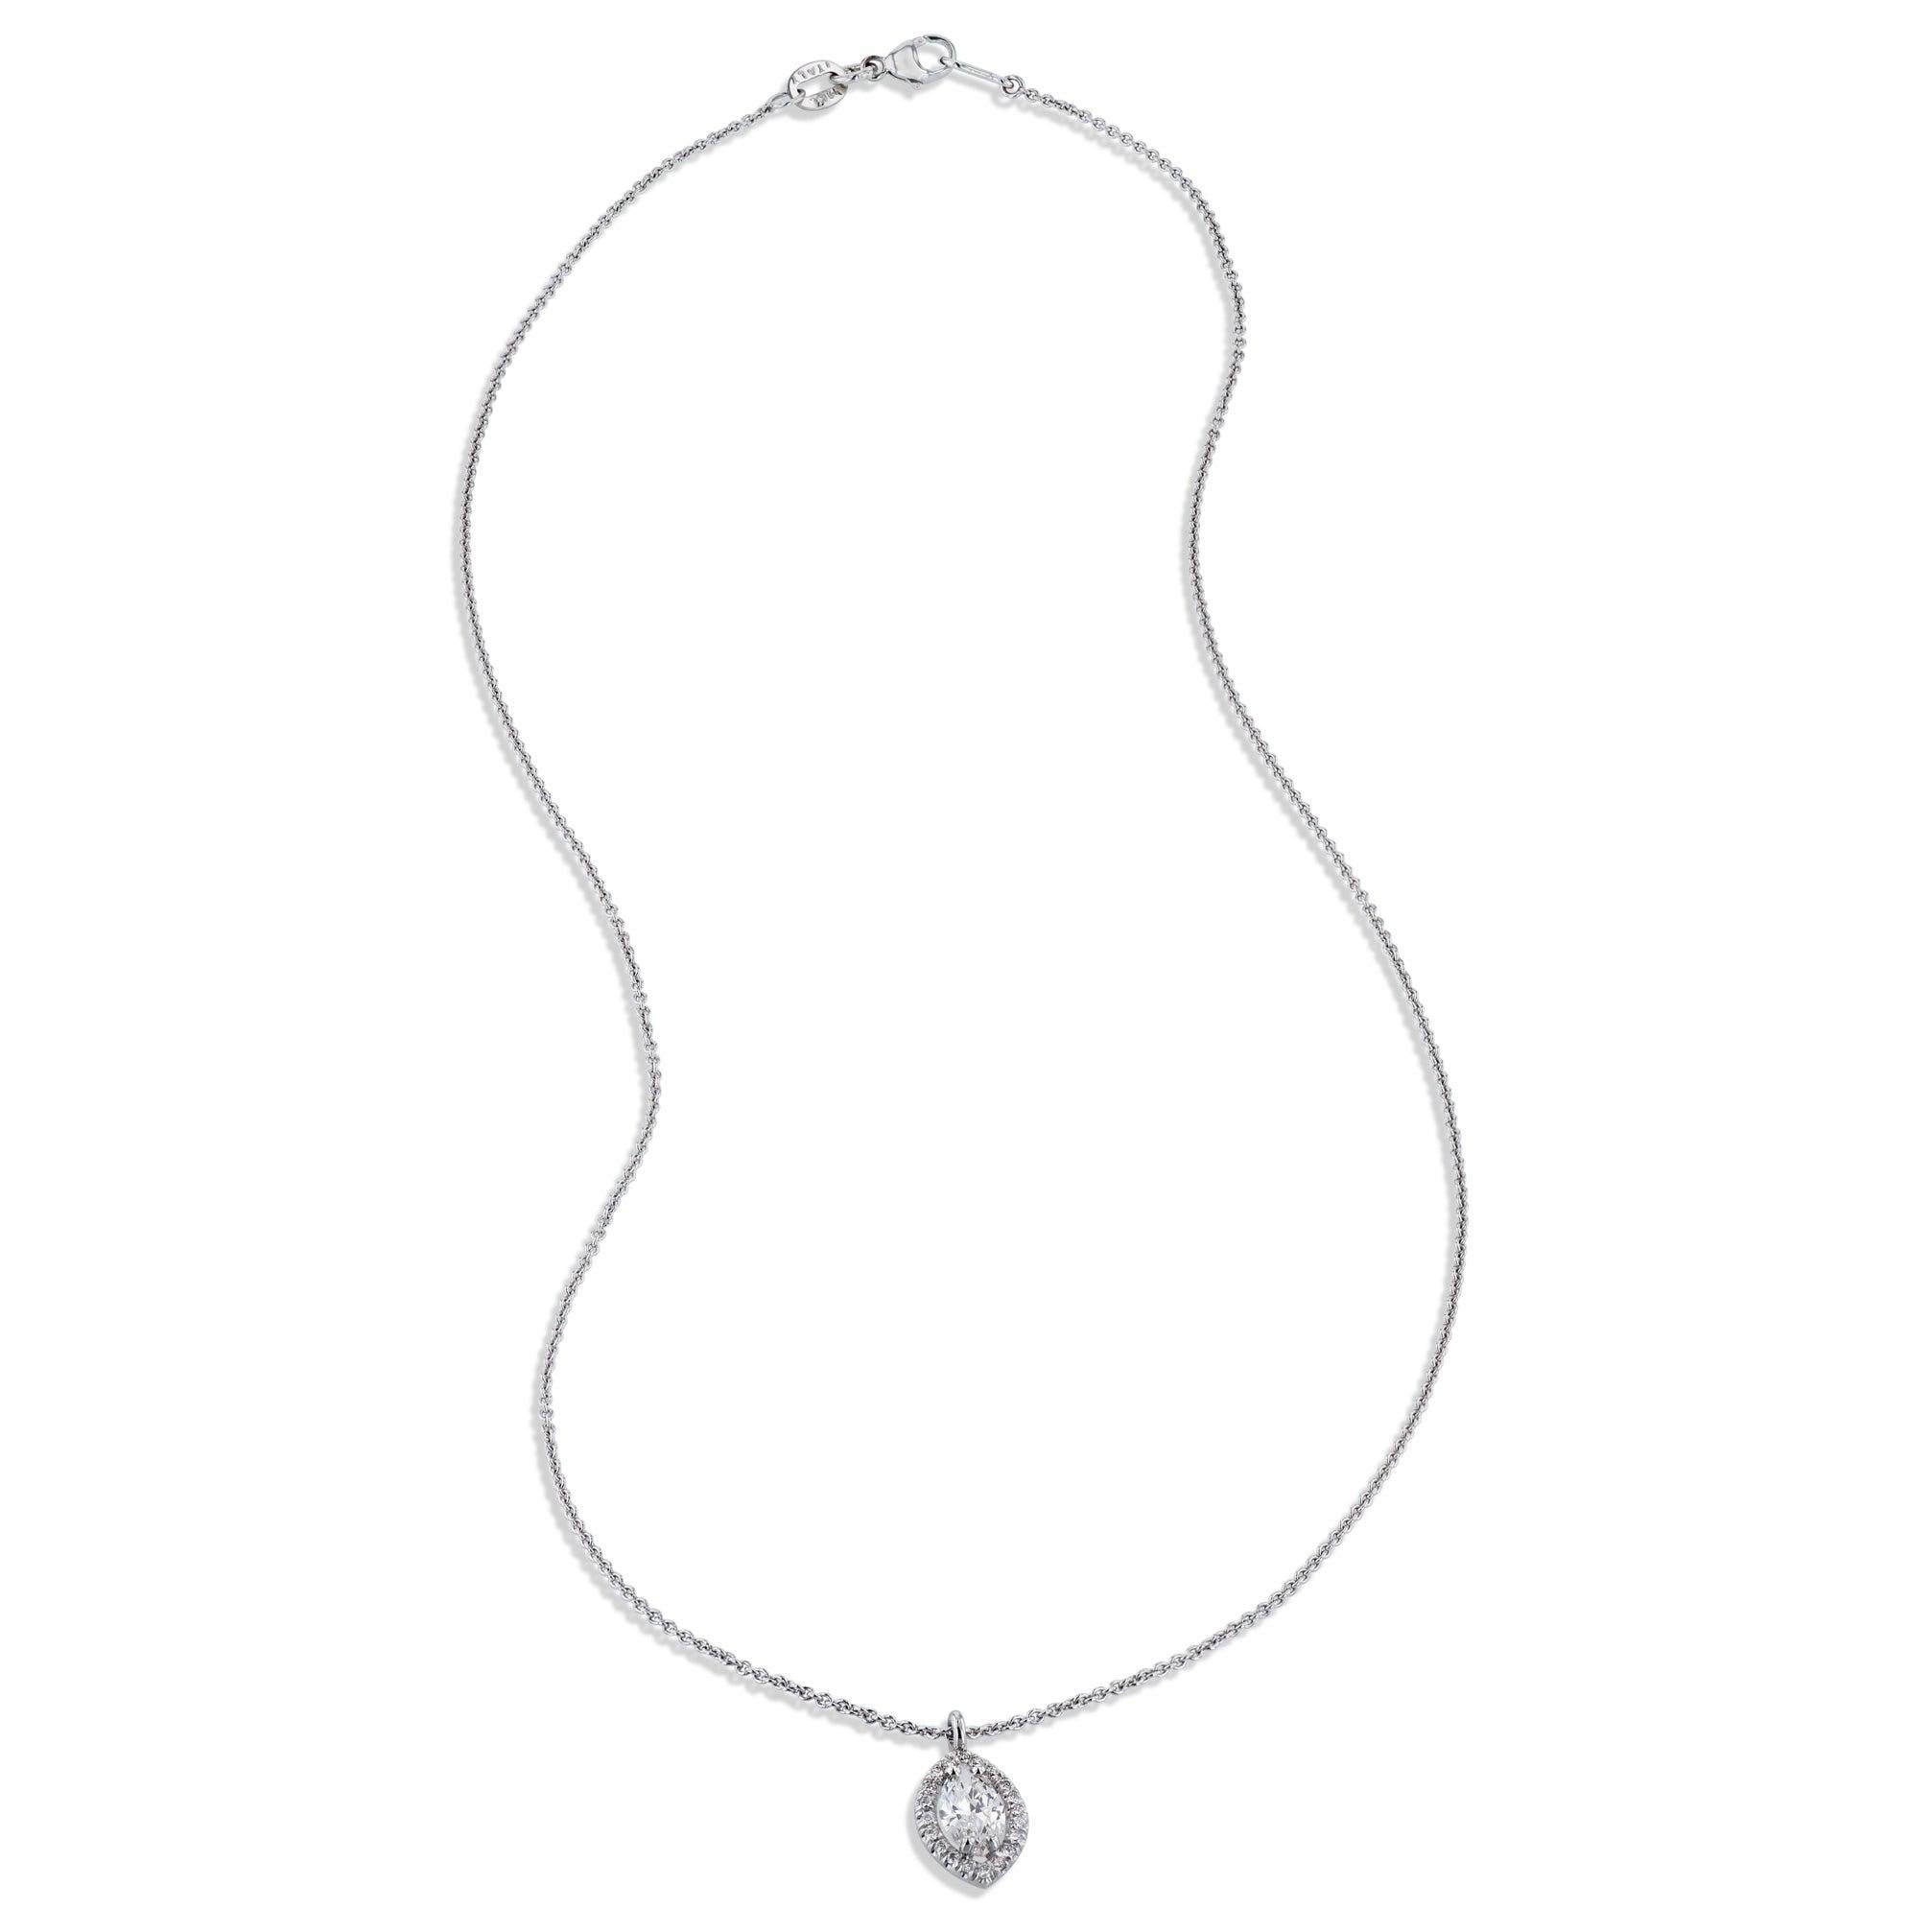 This gorgeous necklace, handmade by H&H Jewels, is sure to make a statement! Exquisitely crafted from 18K white gold, this pendant sparkles with a magnificent  marquise cut diamond as its centerpiece. A diamond halo adds a pop of luxe to your style